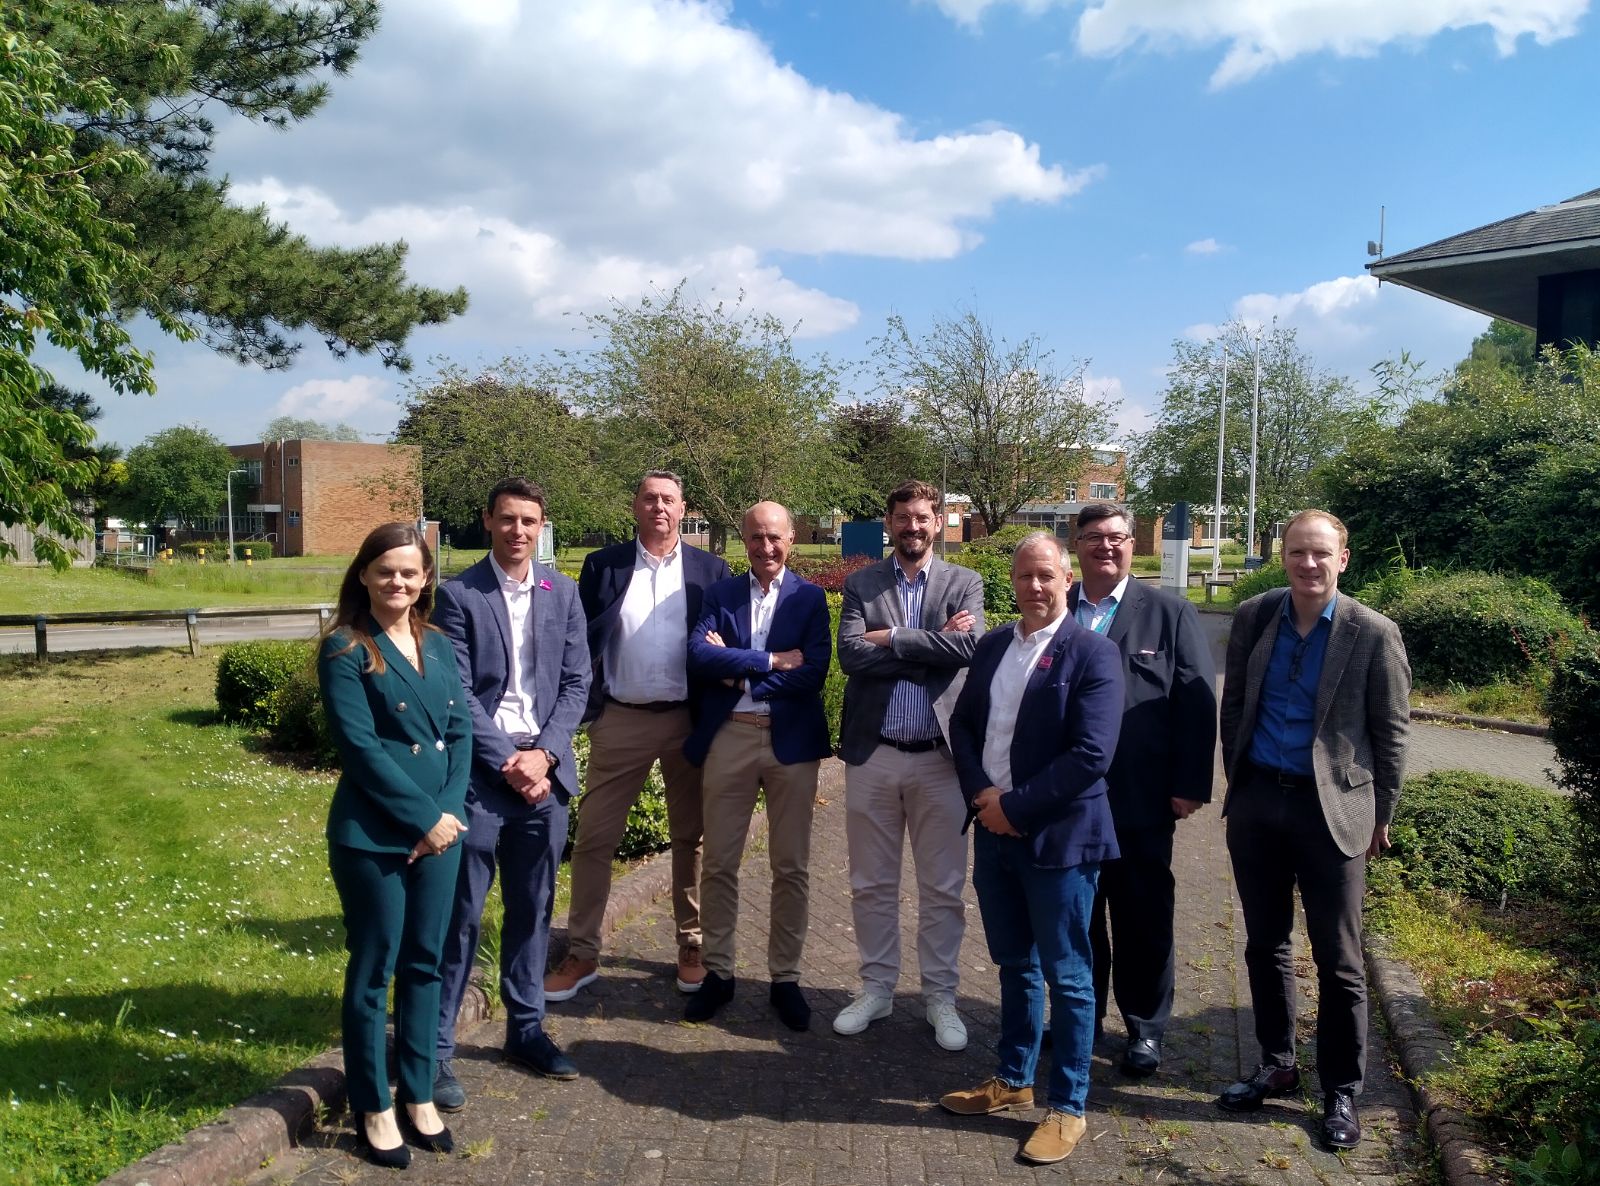 Representatives from the Severn Edge Low Carbon Energy Park and Industria EU, James Cooke (second from left), Chris Turner (fourth from left) and Szczepan Ruman (centre (fourth from right)) -picture contributed